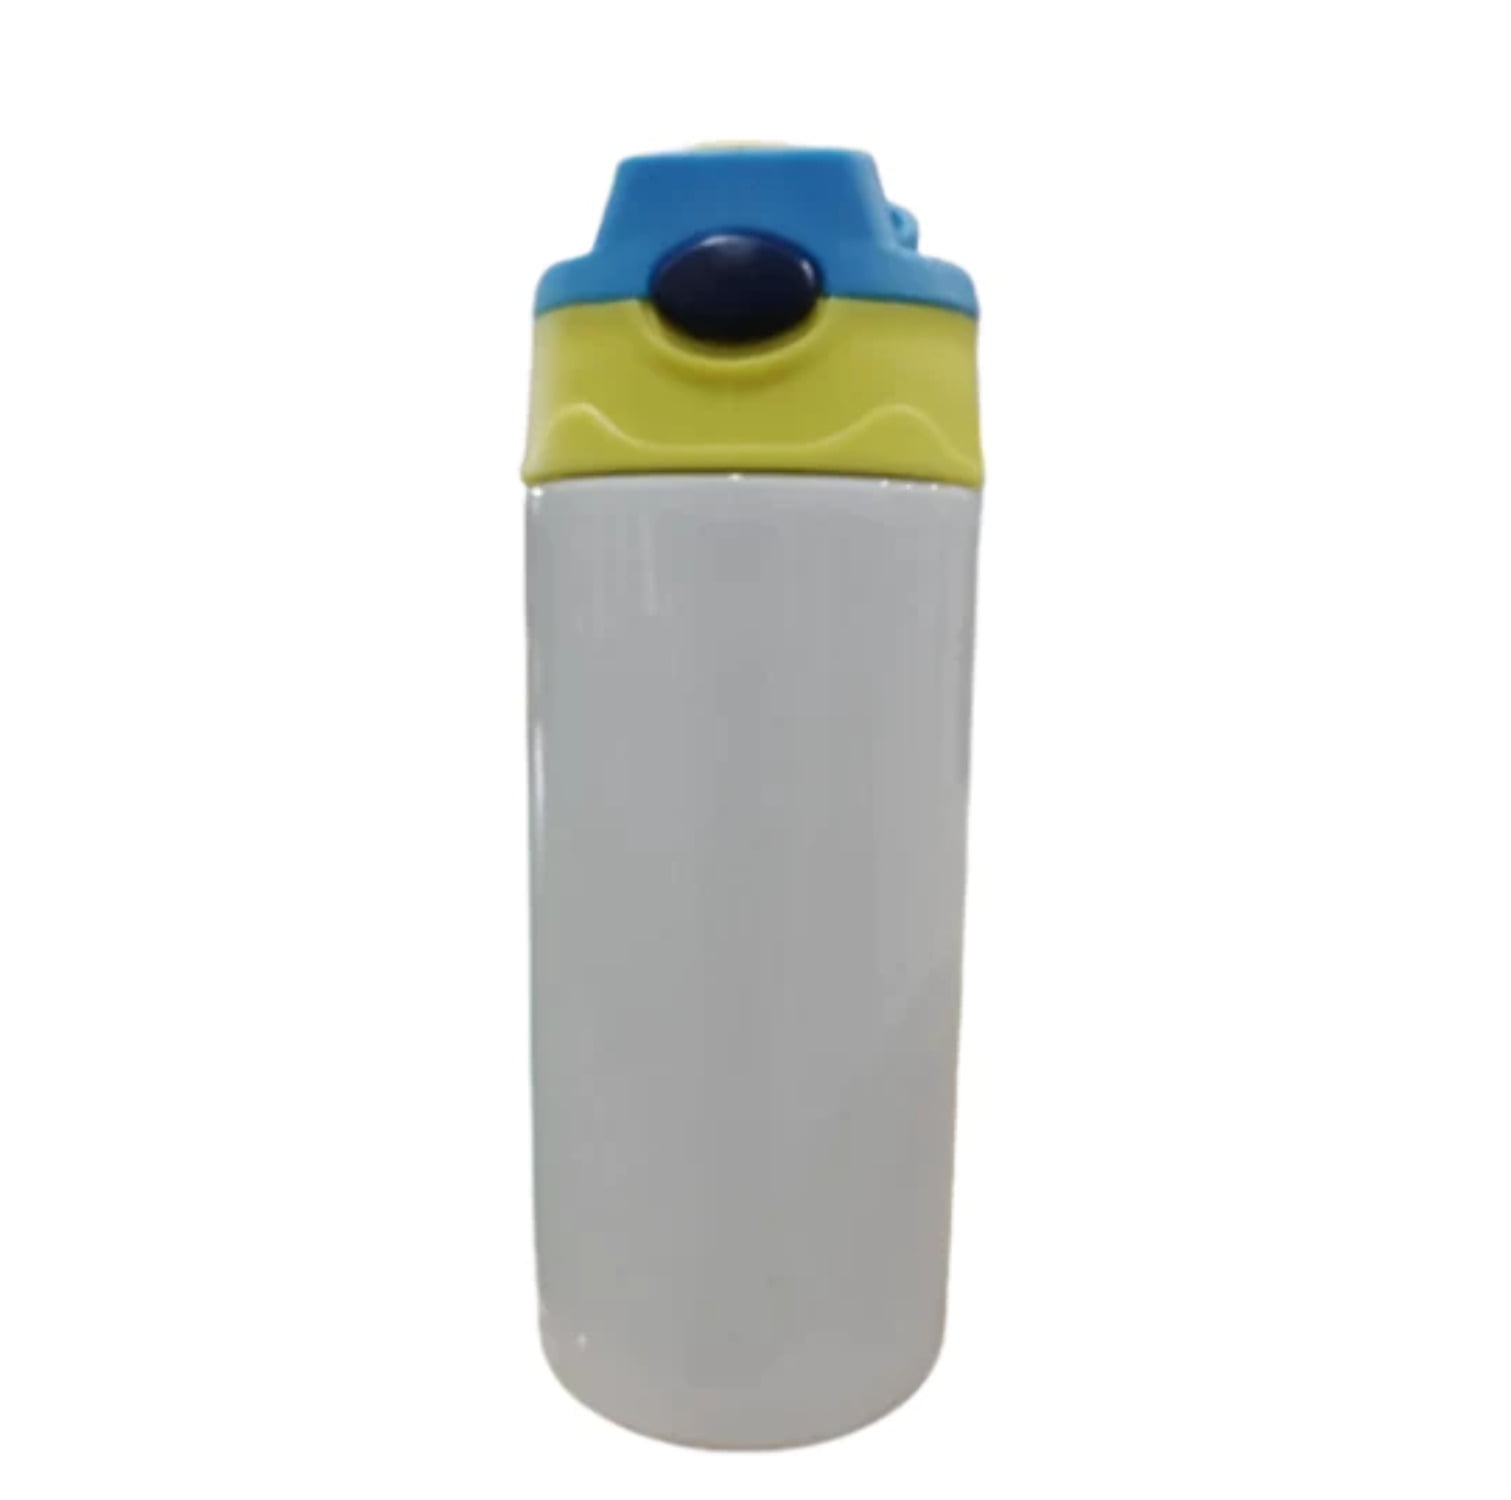 12 oz. Kids Stainless Steel Sublimation Water Bottle Blank - White w/ Blue  & Yellow Cap